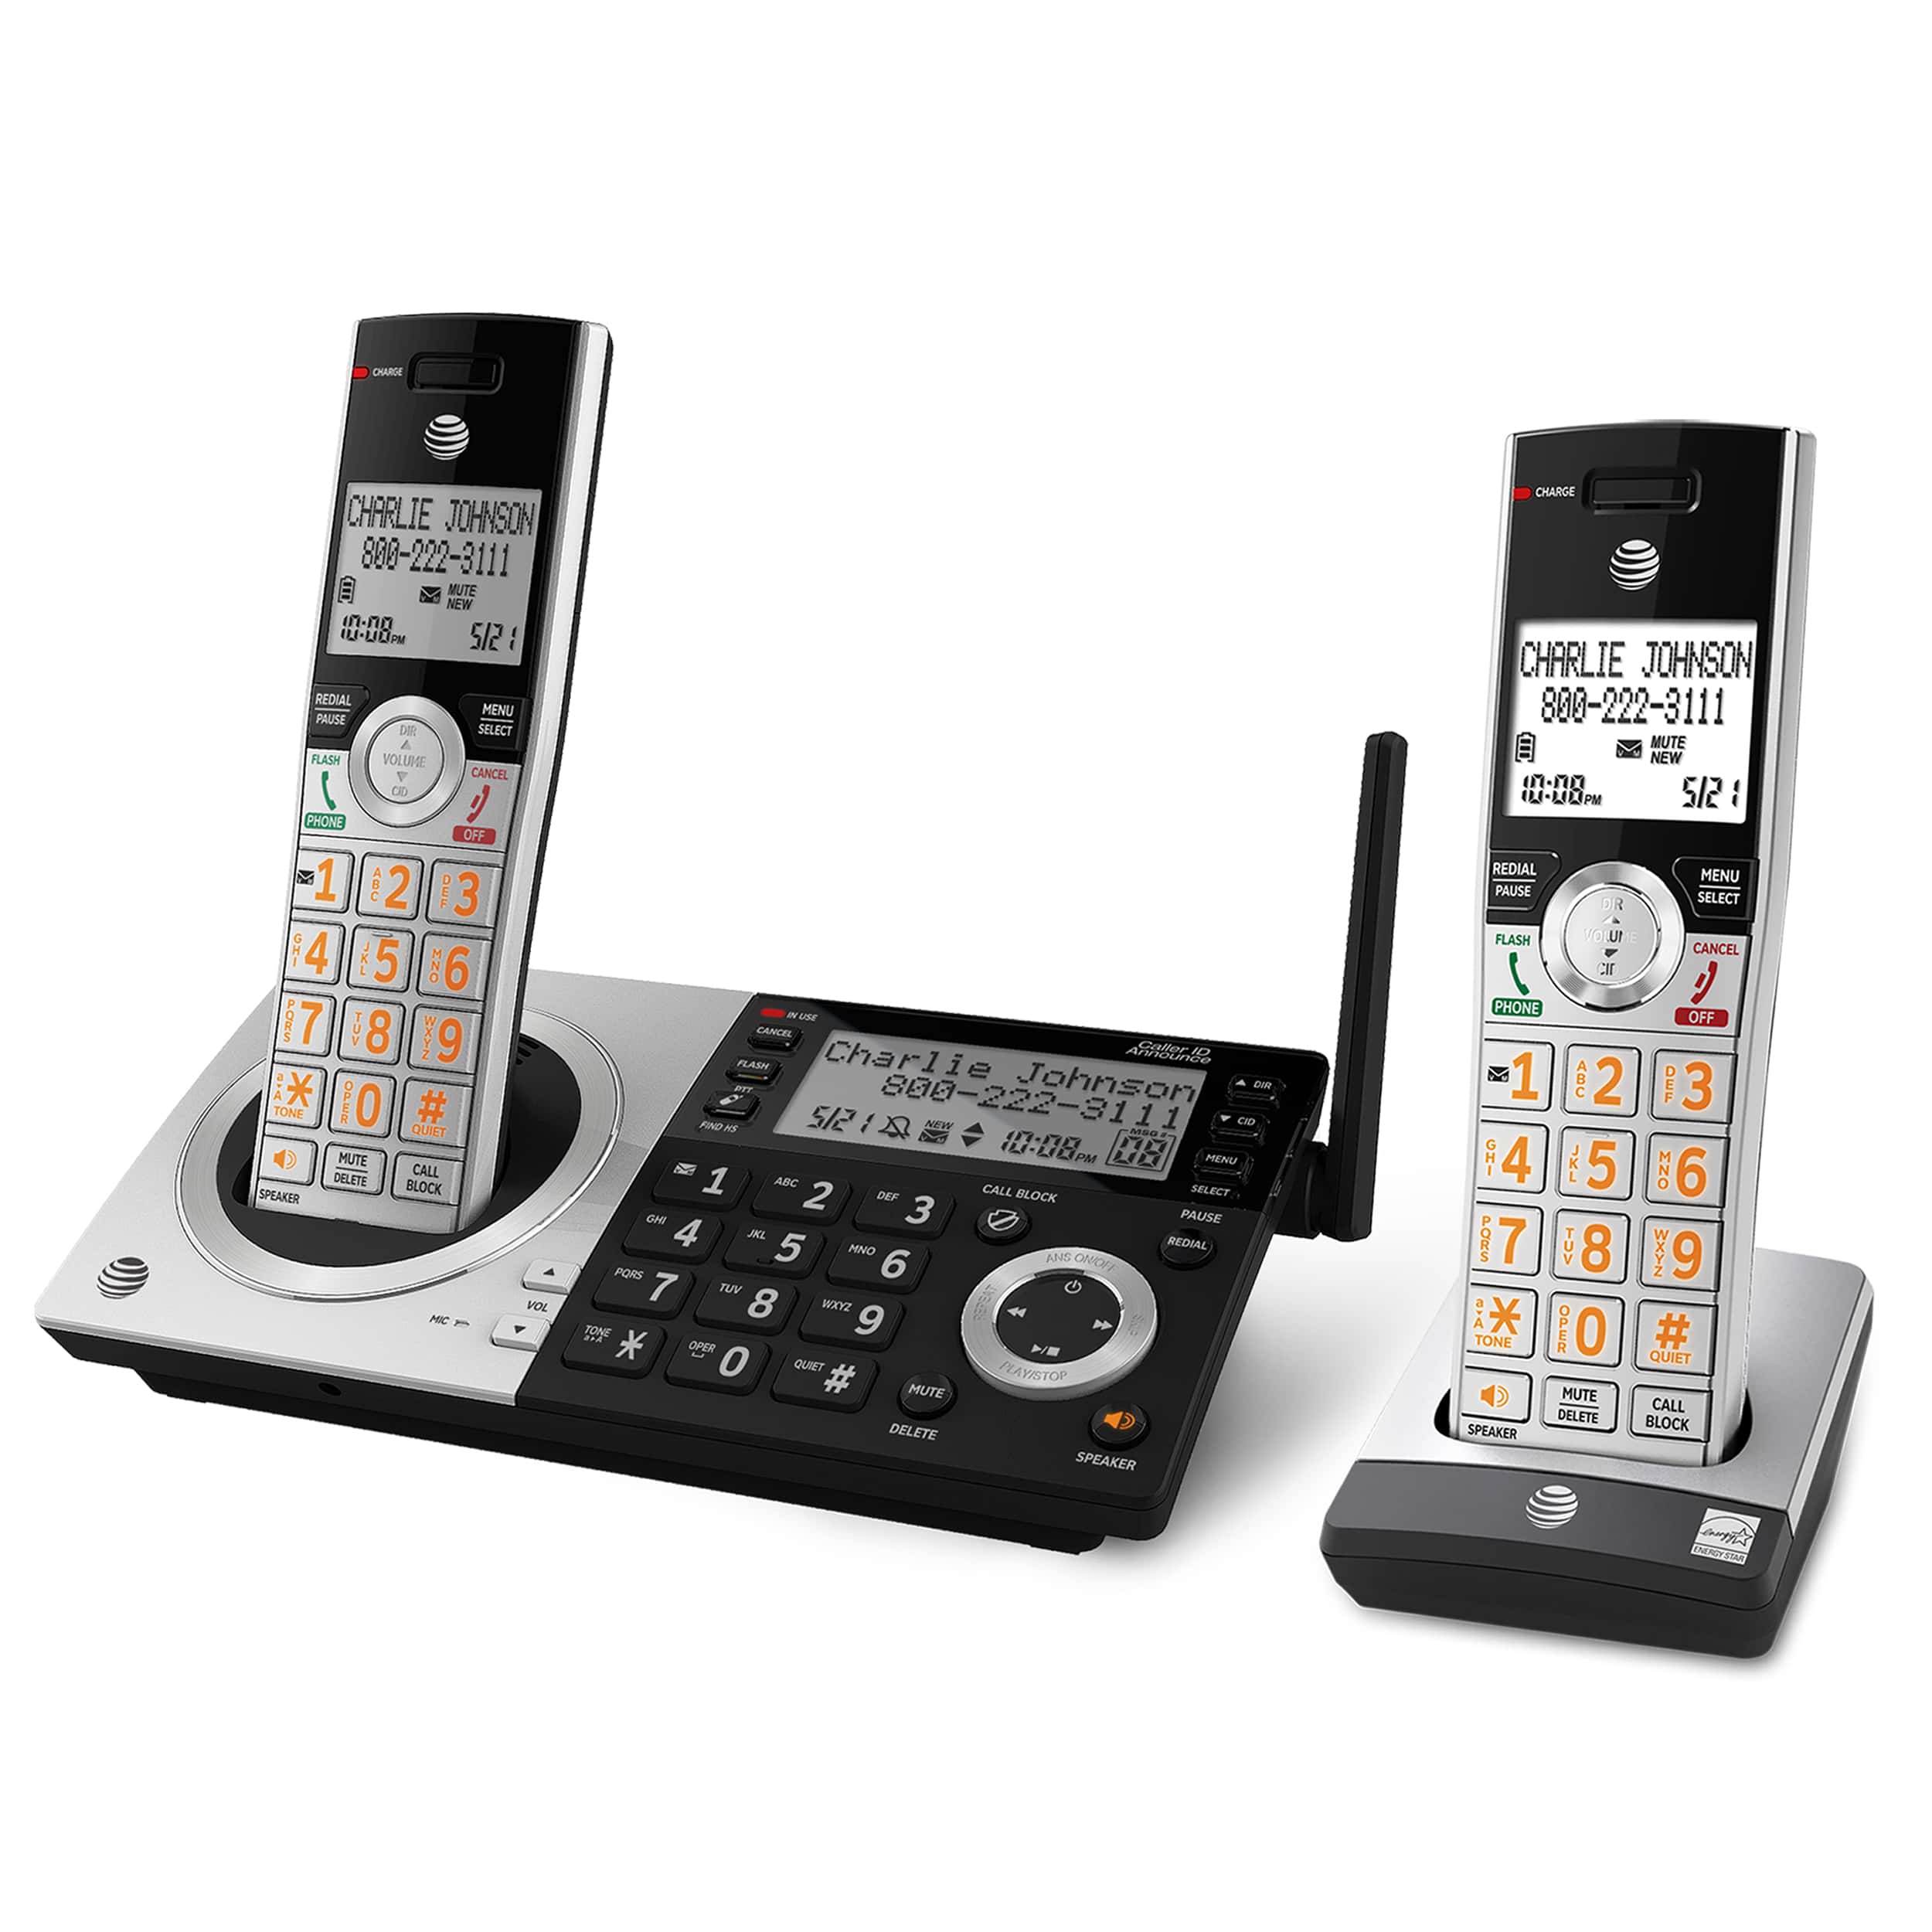 2 handset phone system with smart call blocker - view 2